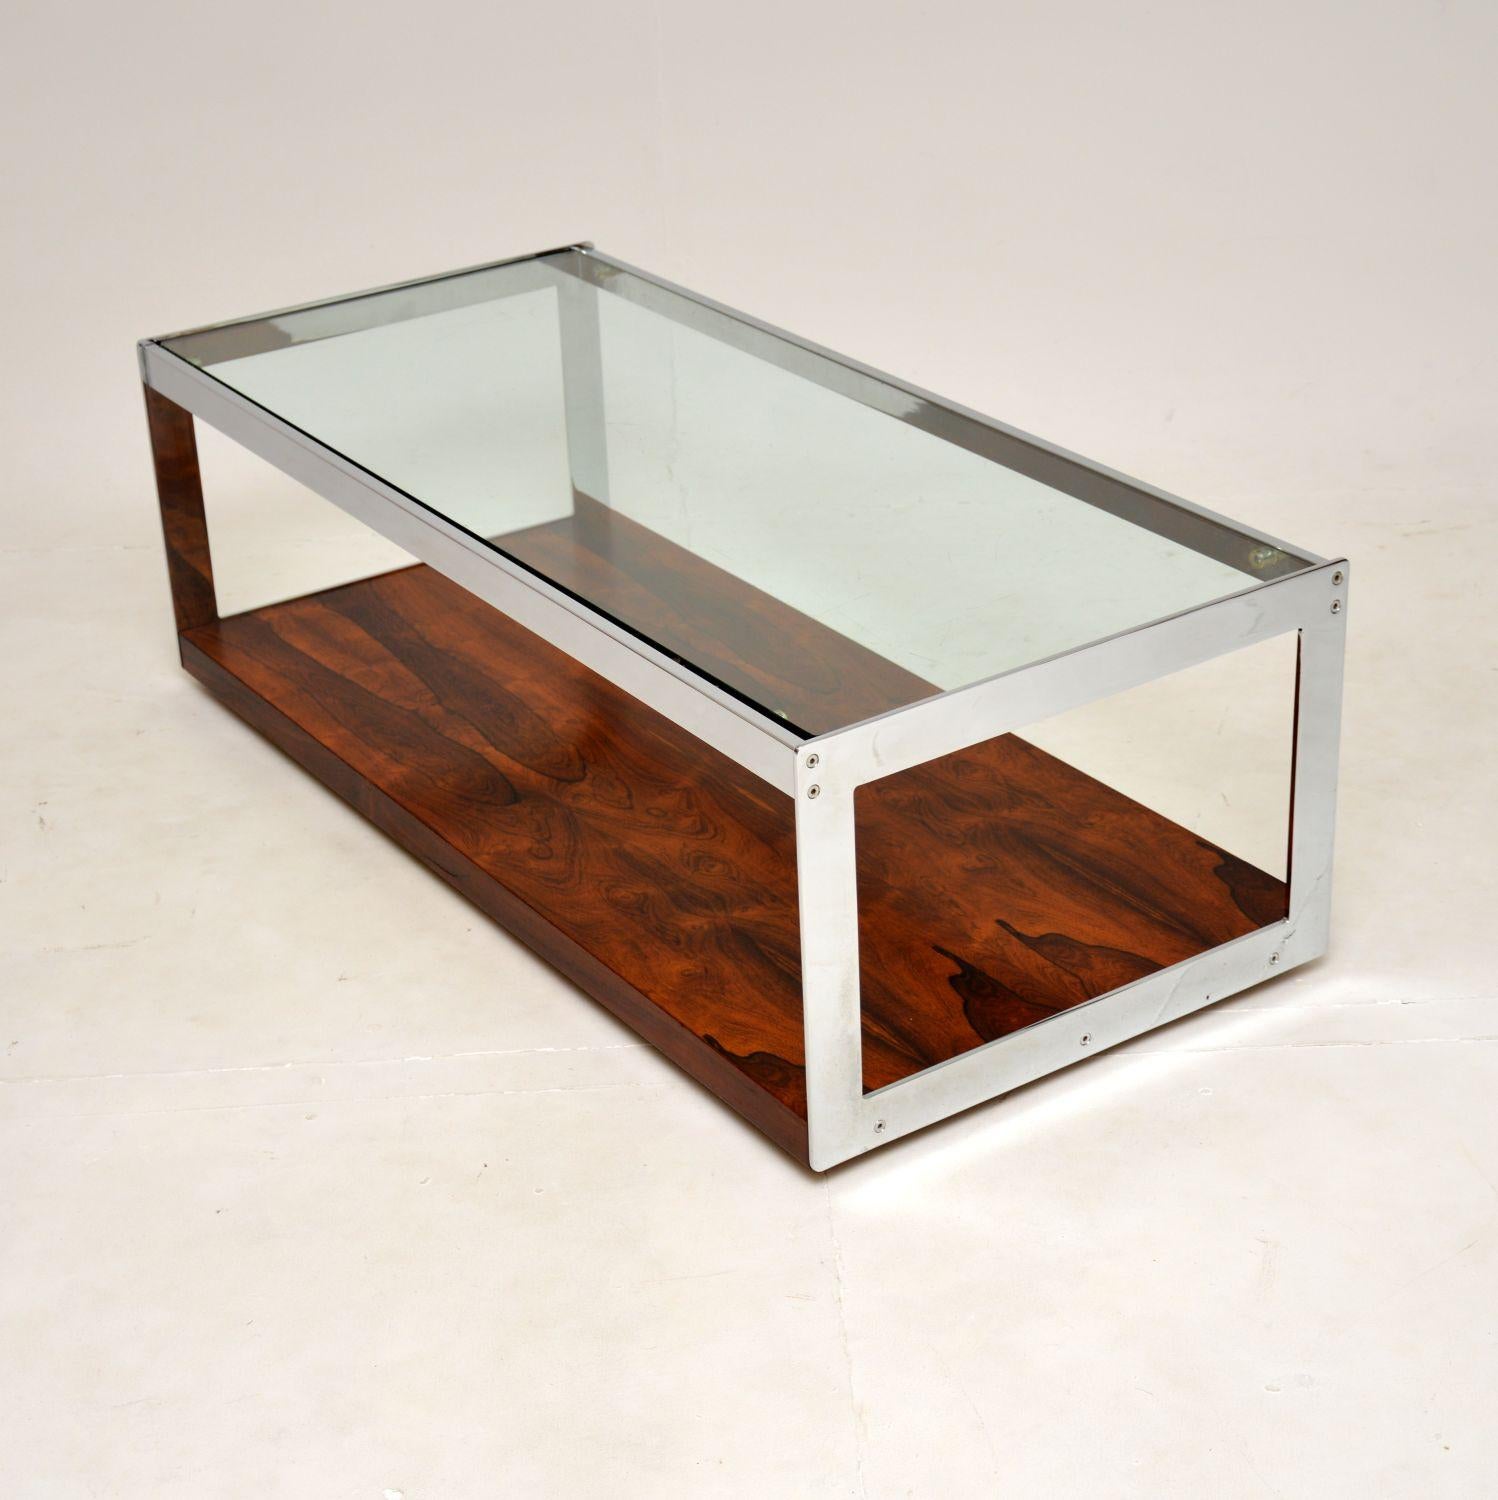 British Vintage Coffee Table by Merrow Associates For Sale